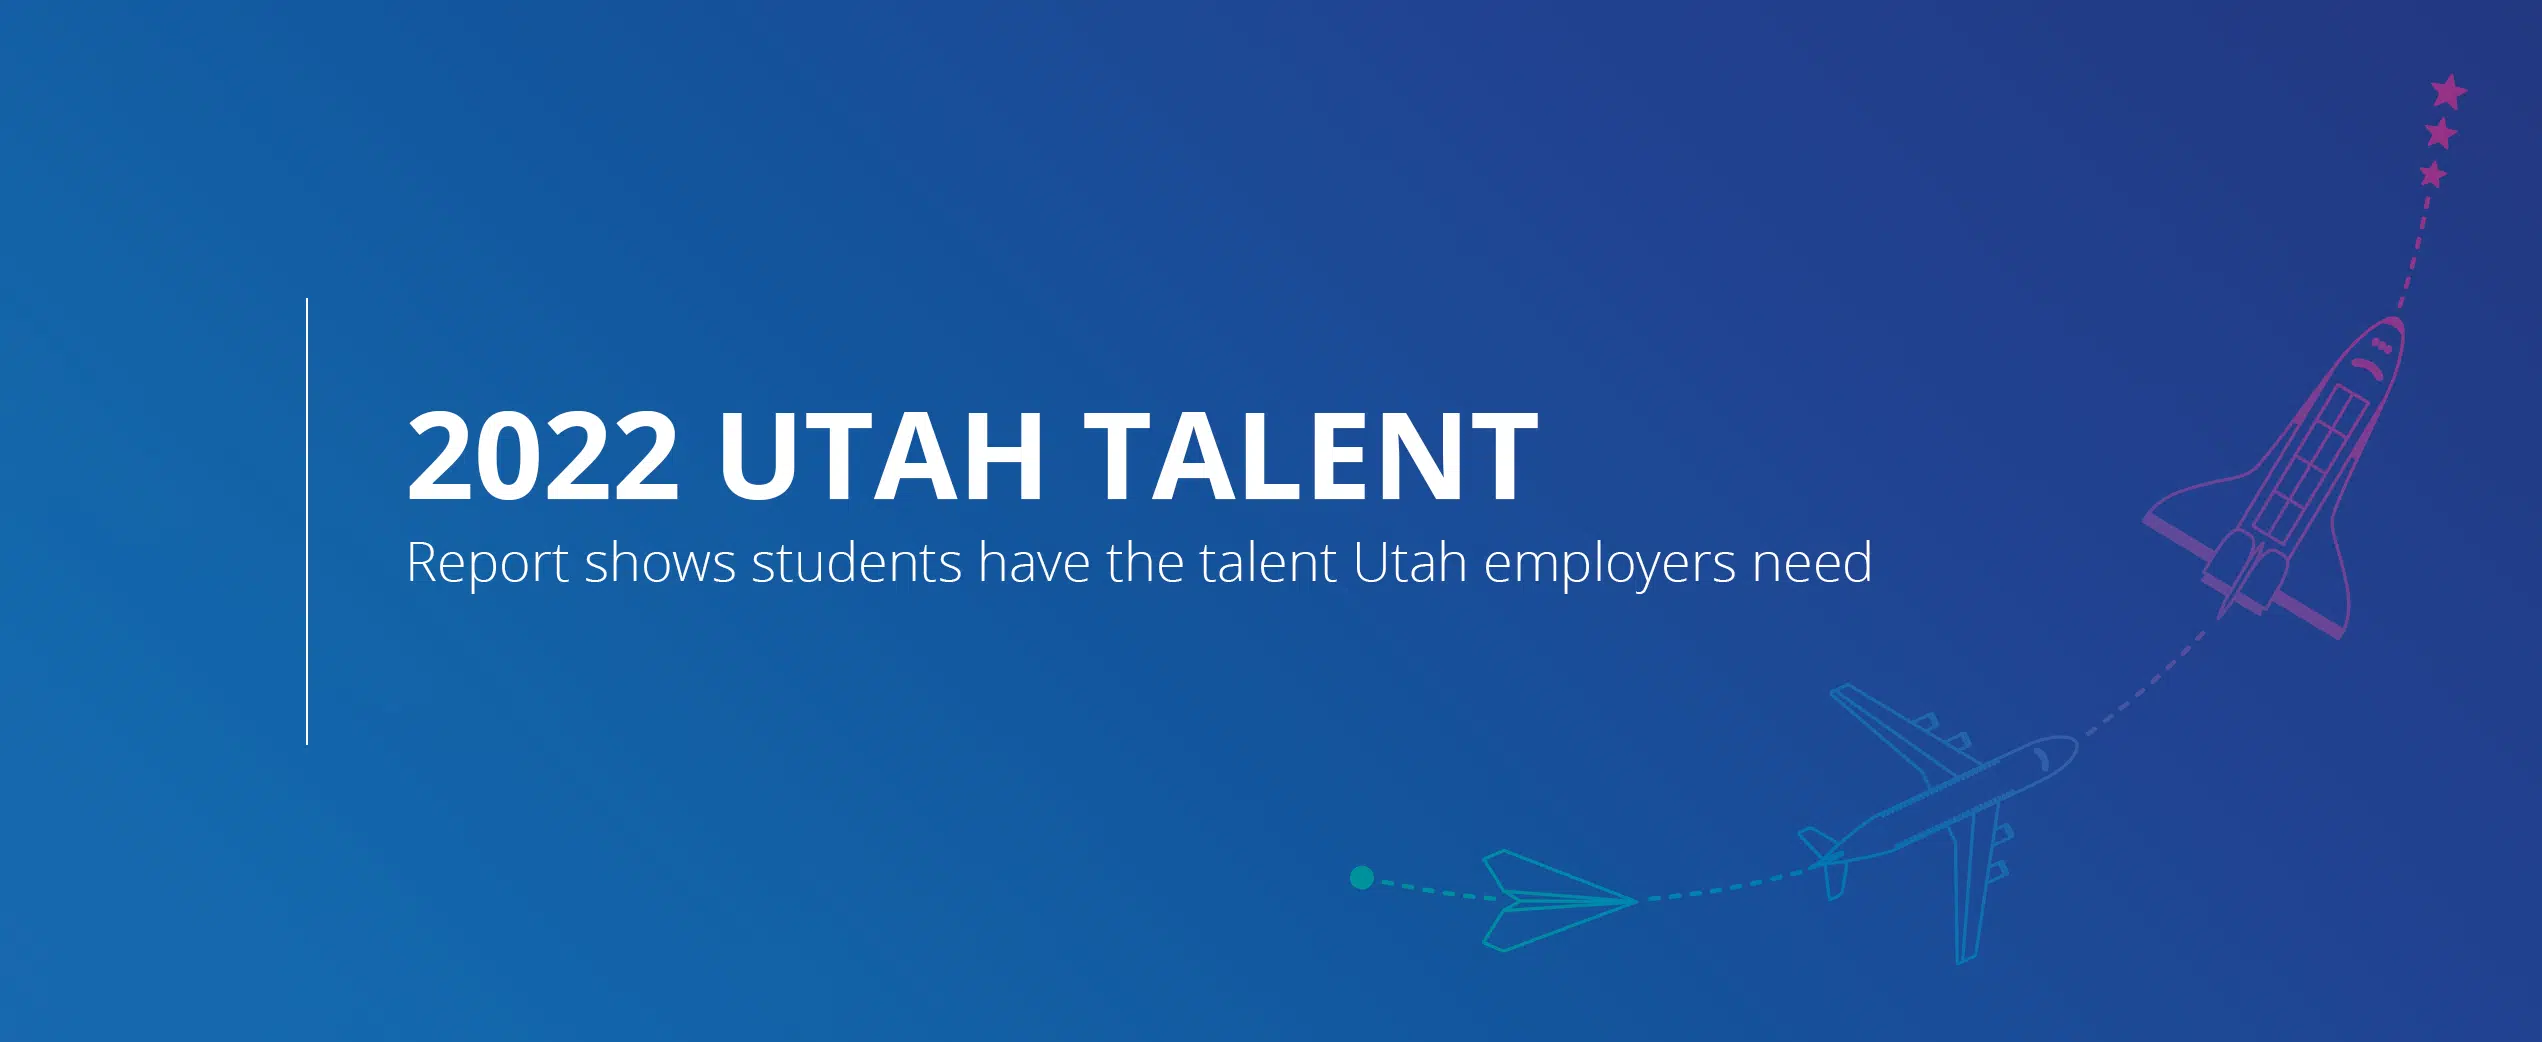 Utah talent report shows students have the talent employers need